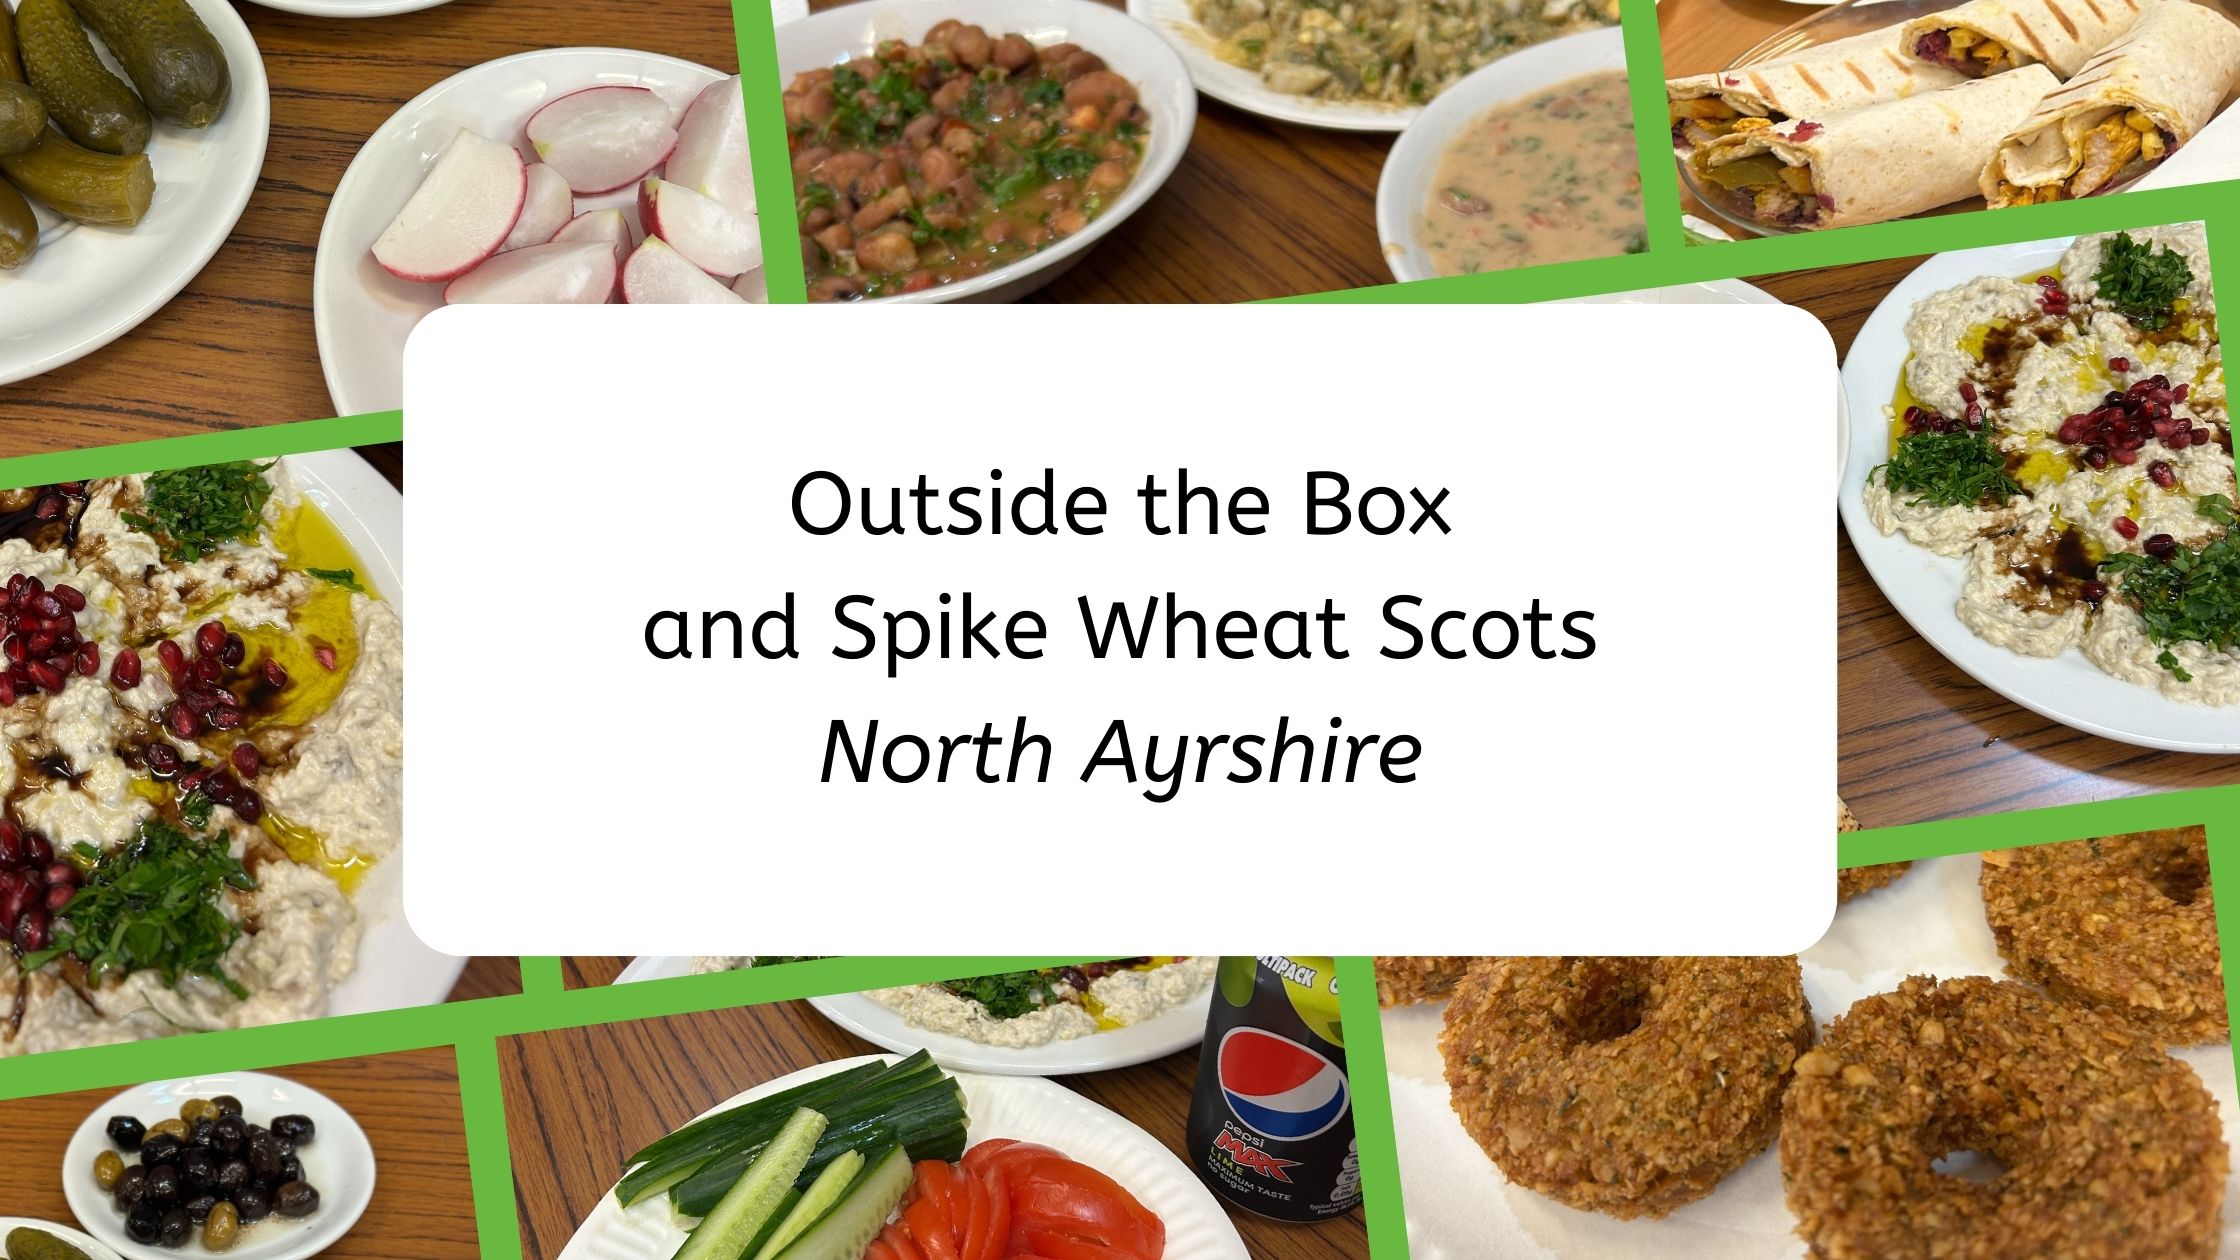 Outside the Box and Spike Wheat Scots North Ayrshire